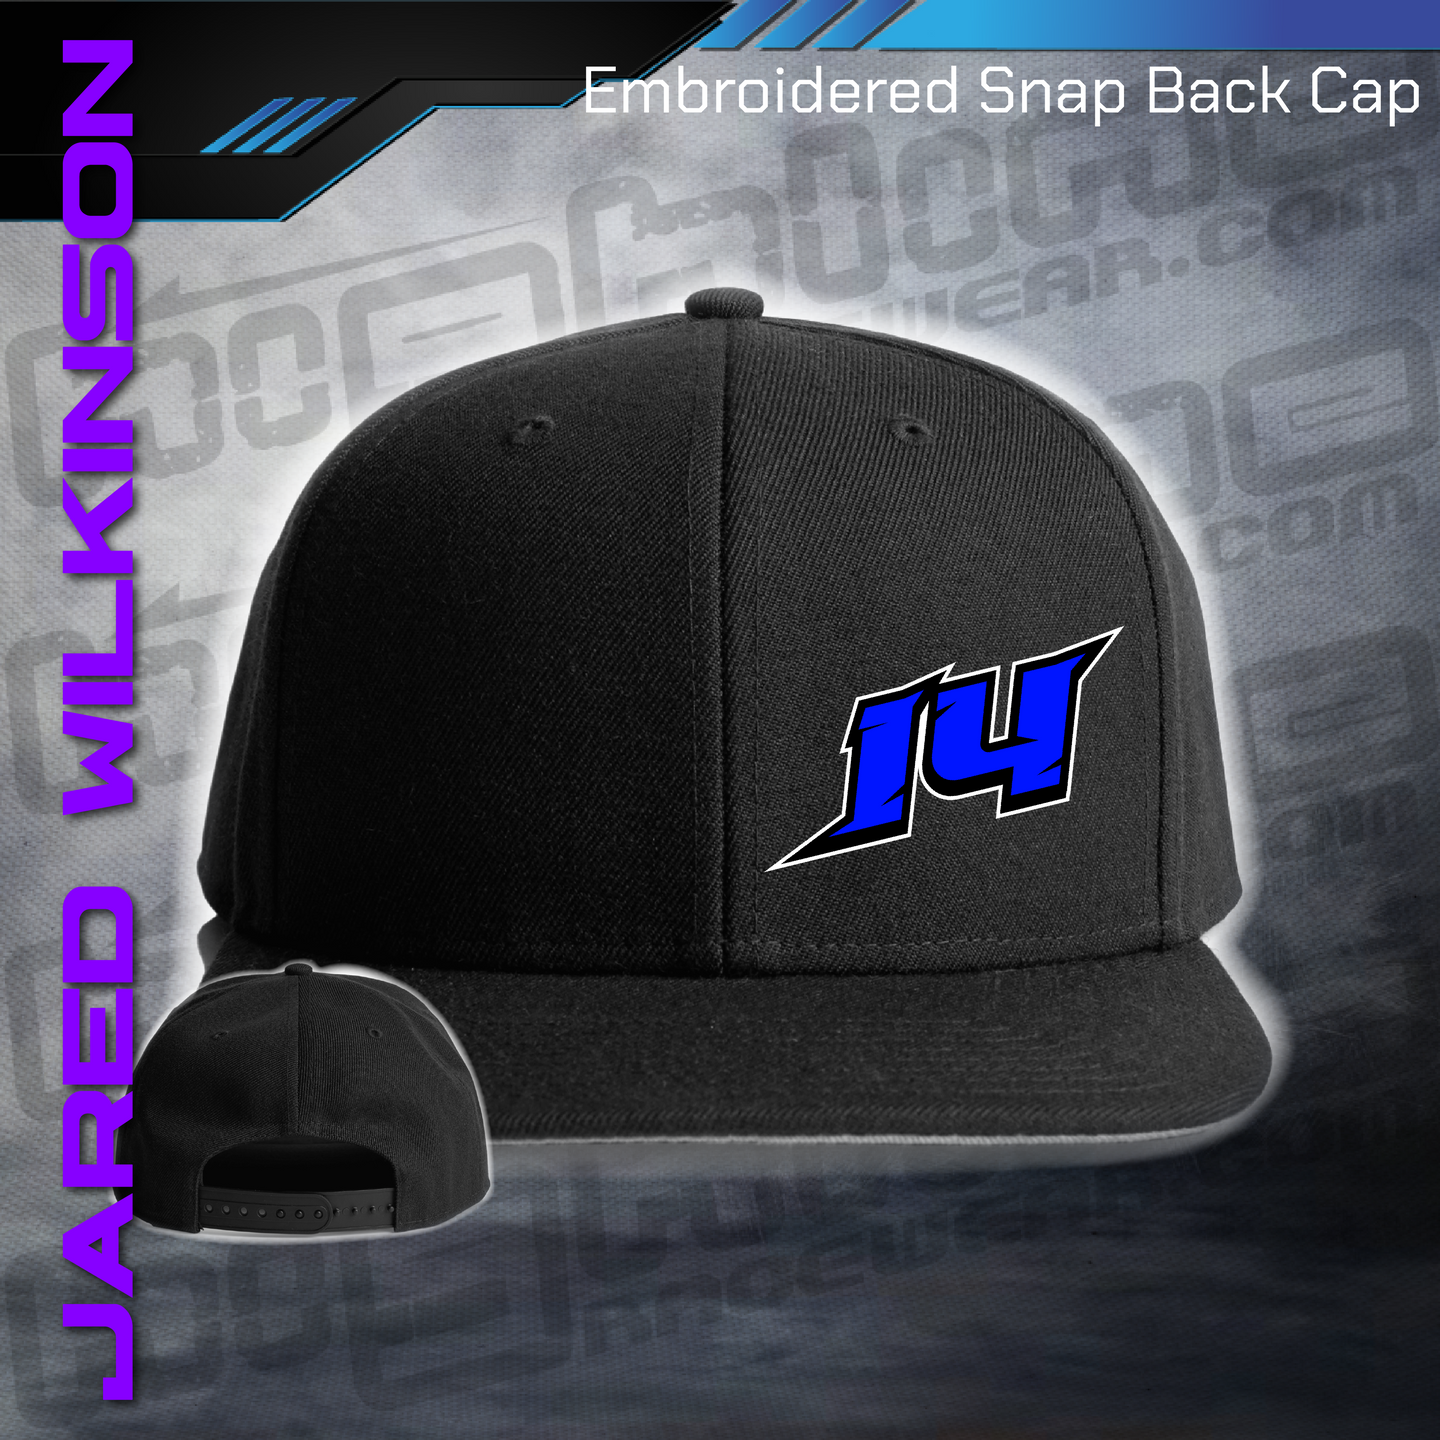 Embroidered Snap Back CAP - Jared Wilkinson